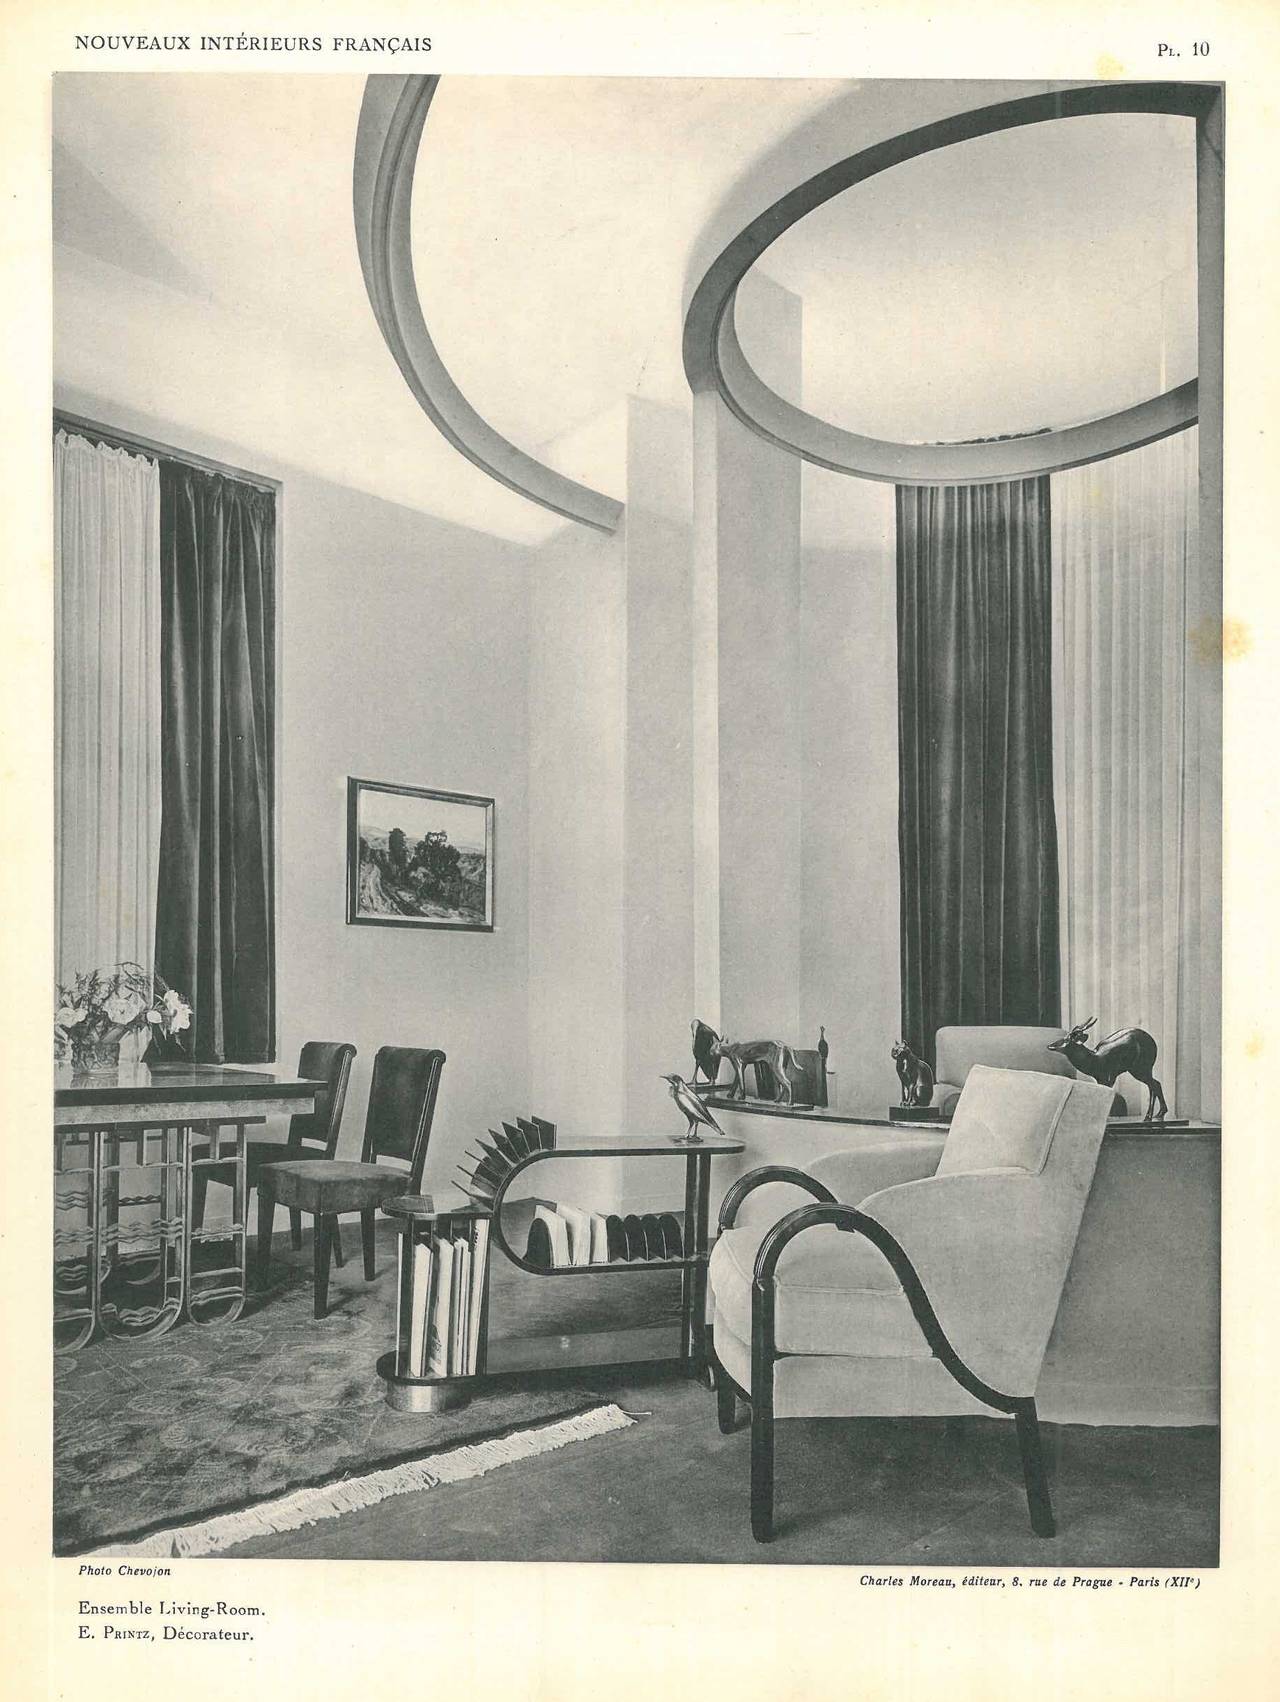 A set of three folio's which are A4 in size, with individual plates of black and white photographs showing room sets designed by some of the great designers and decorators of the Art Deco era, names such as Rene Herbst, Maurice Dufrène, Jacques